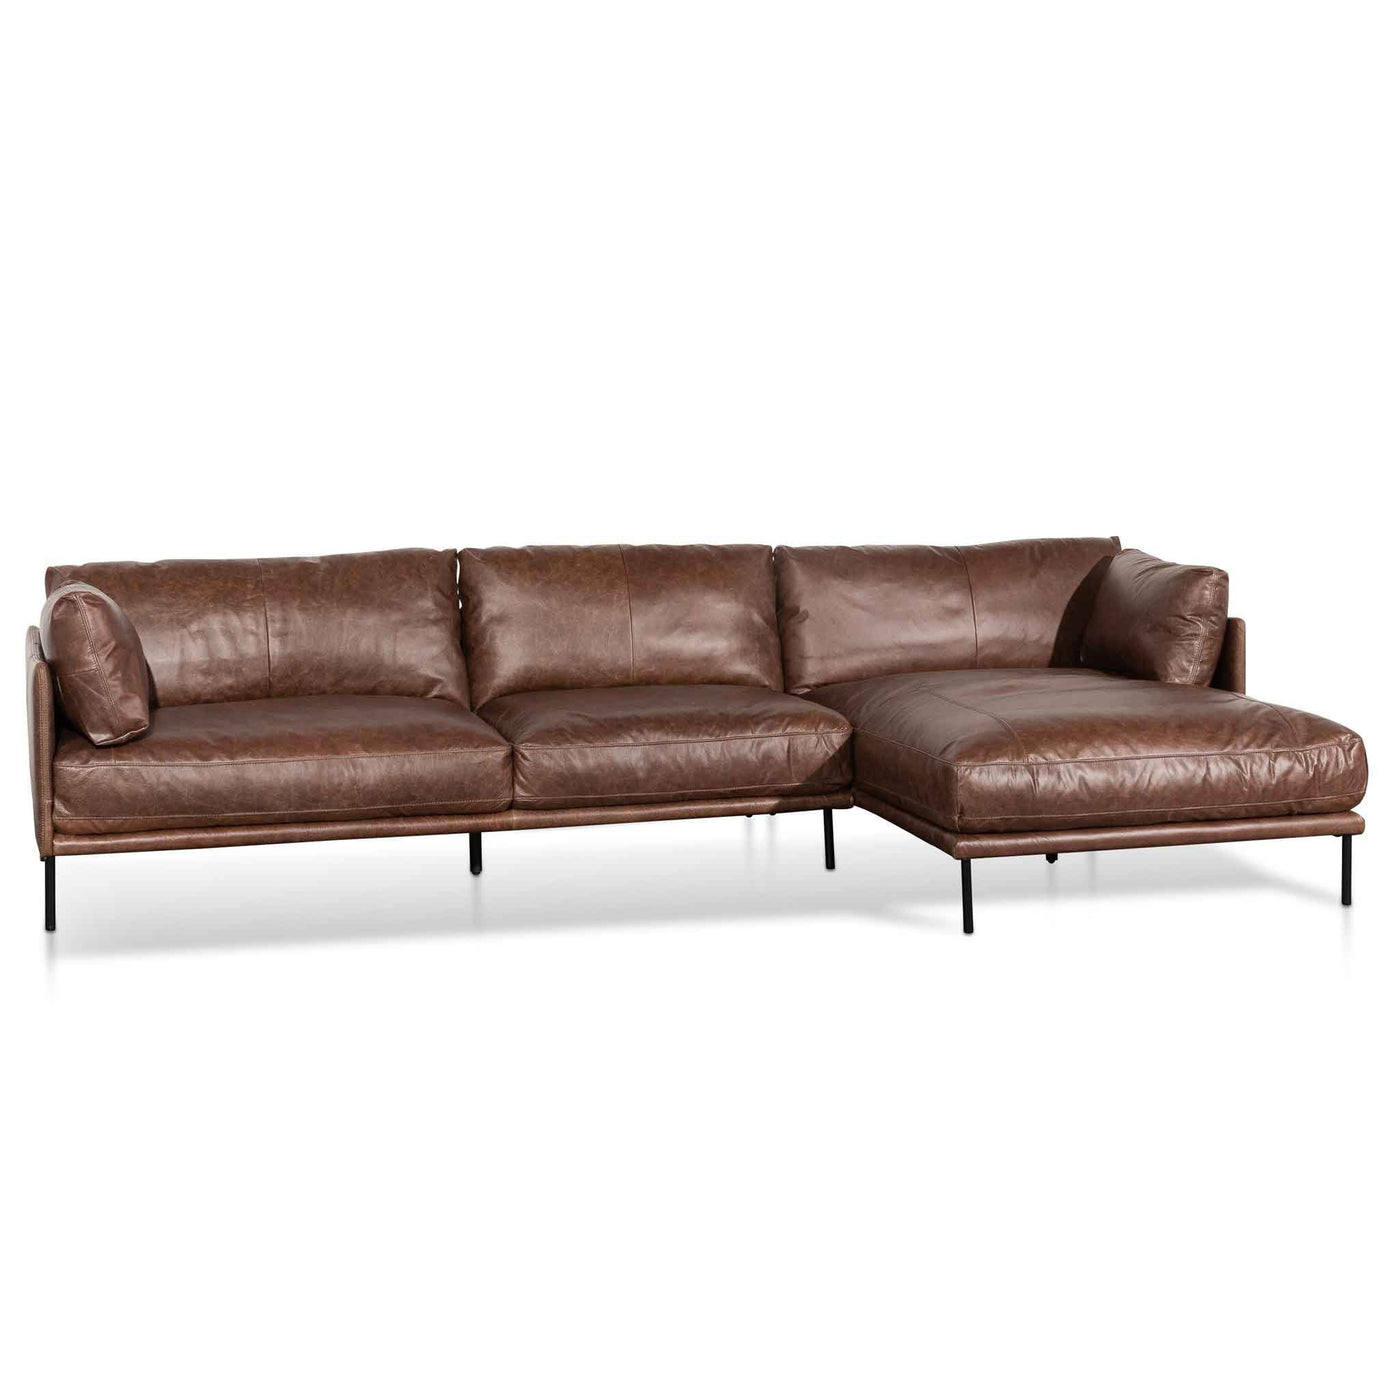 4 Seater Right Chaise Leather Sofa - Dark Brown